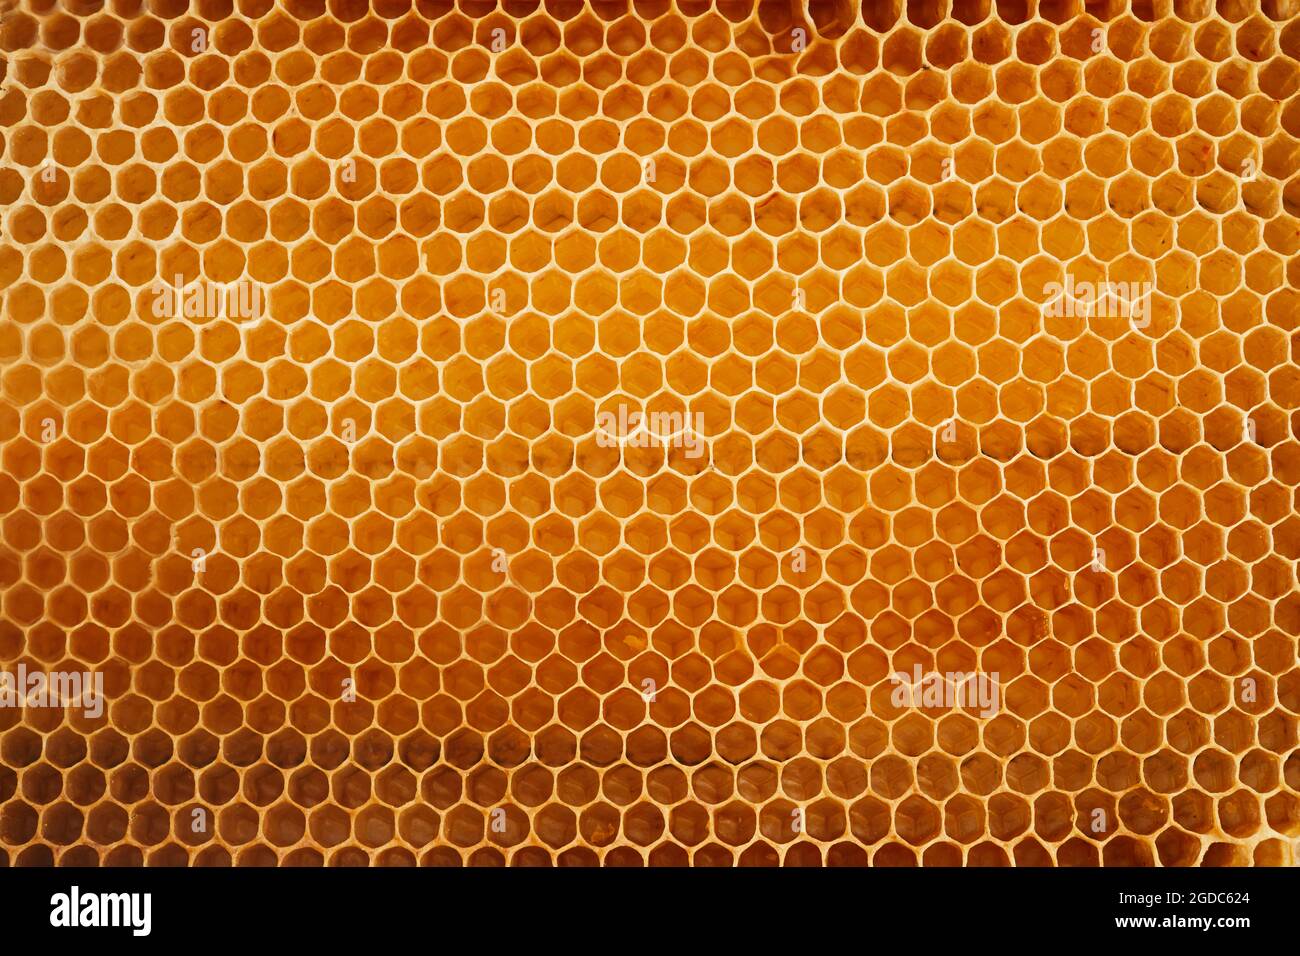 Background texture of a section of wax honeycomb from a bee hive filled with golden honey Stock Photo